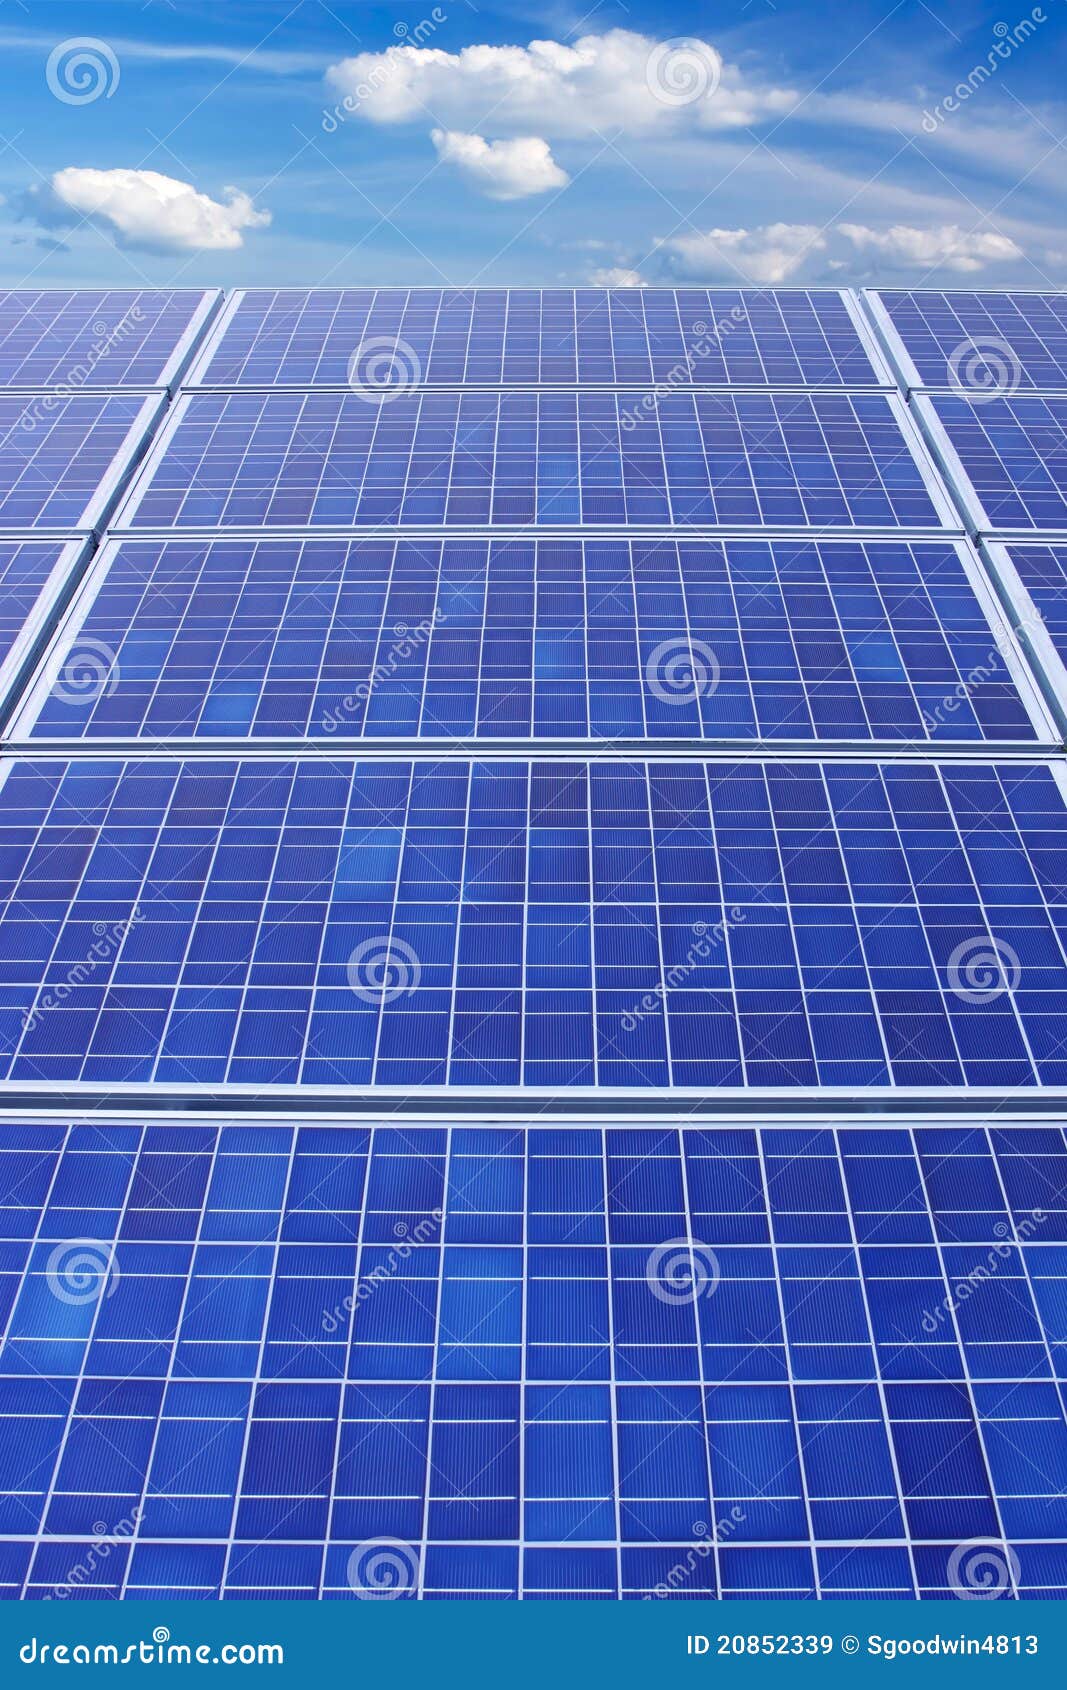 Solar Panels And Sky Vertical Royalty Free Stock Images - Image 